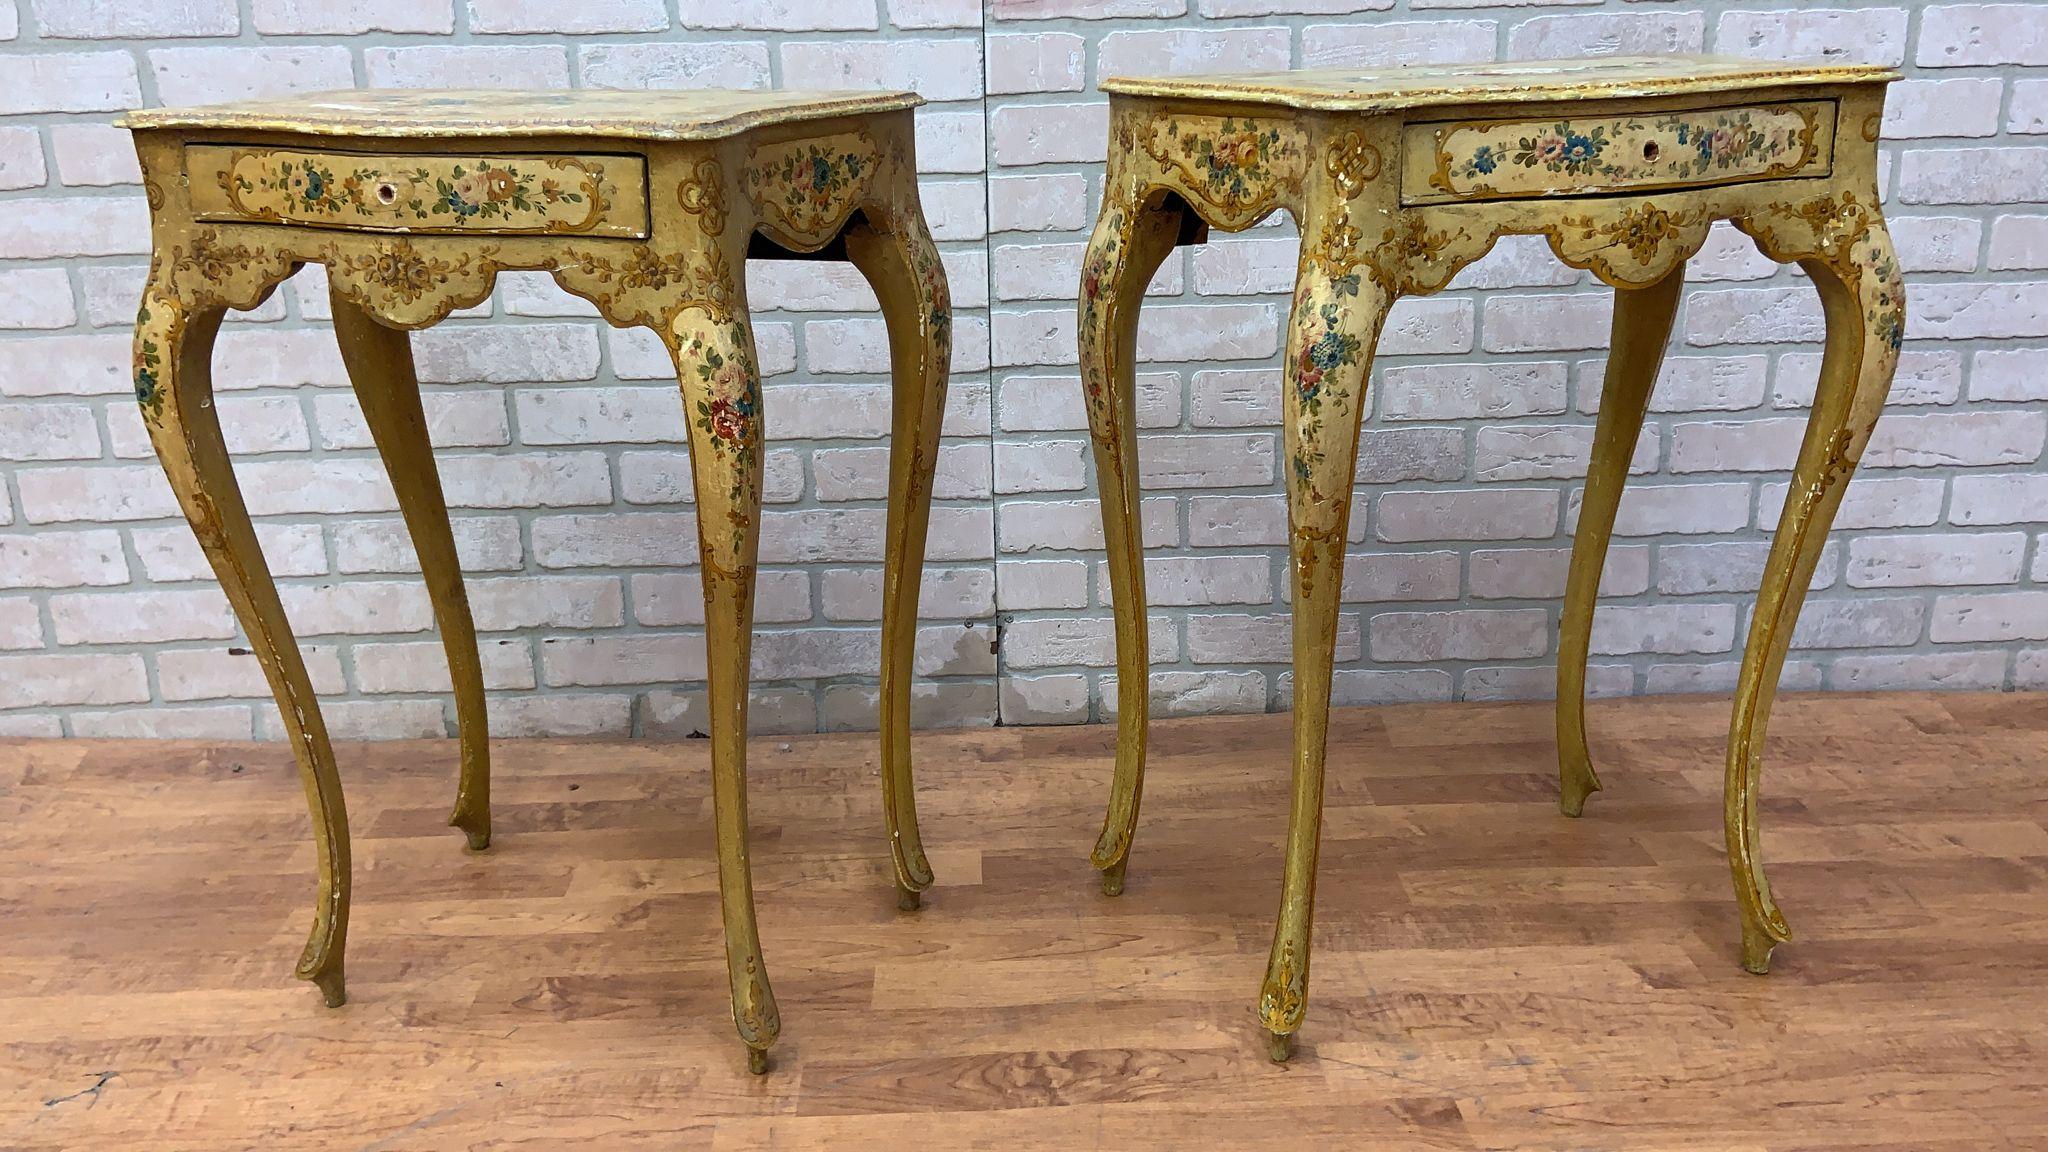 Antique Rococo Style Venetian Hand Painted Vanity Desk & Side Tables, Set of 3 For Sale 10